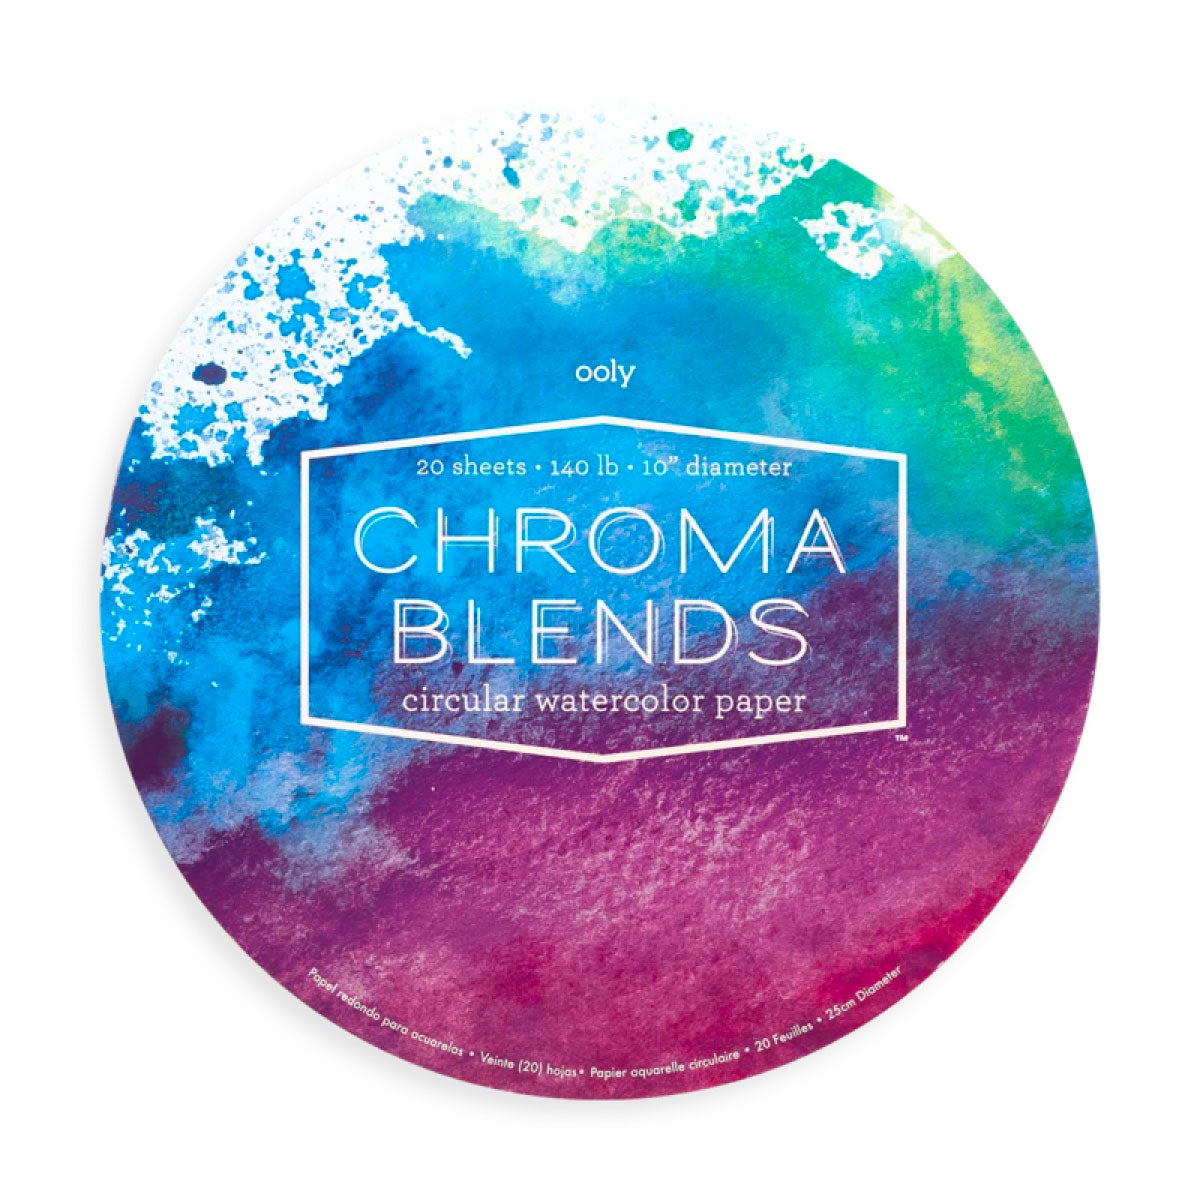 Chroma Blends Circular Watercolor Paper from Ooly